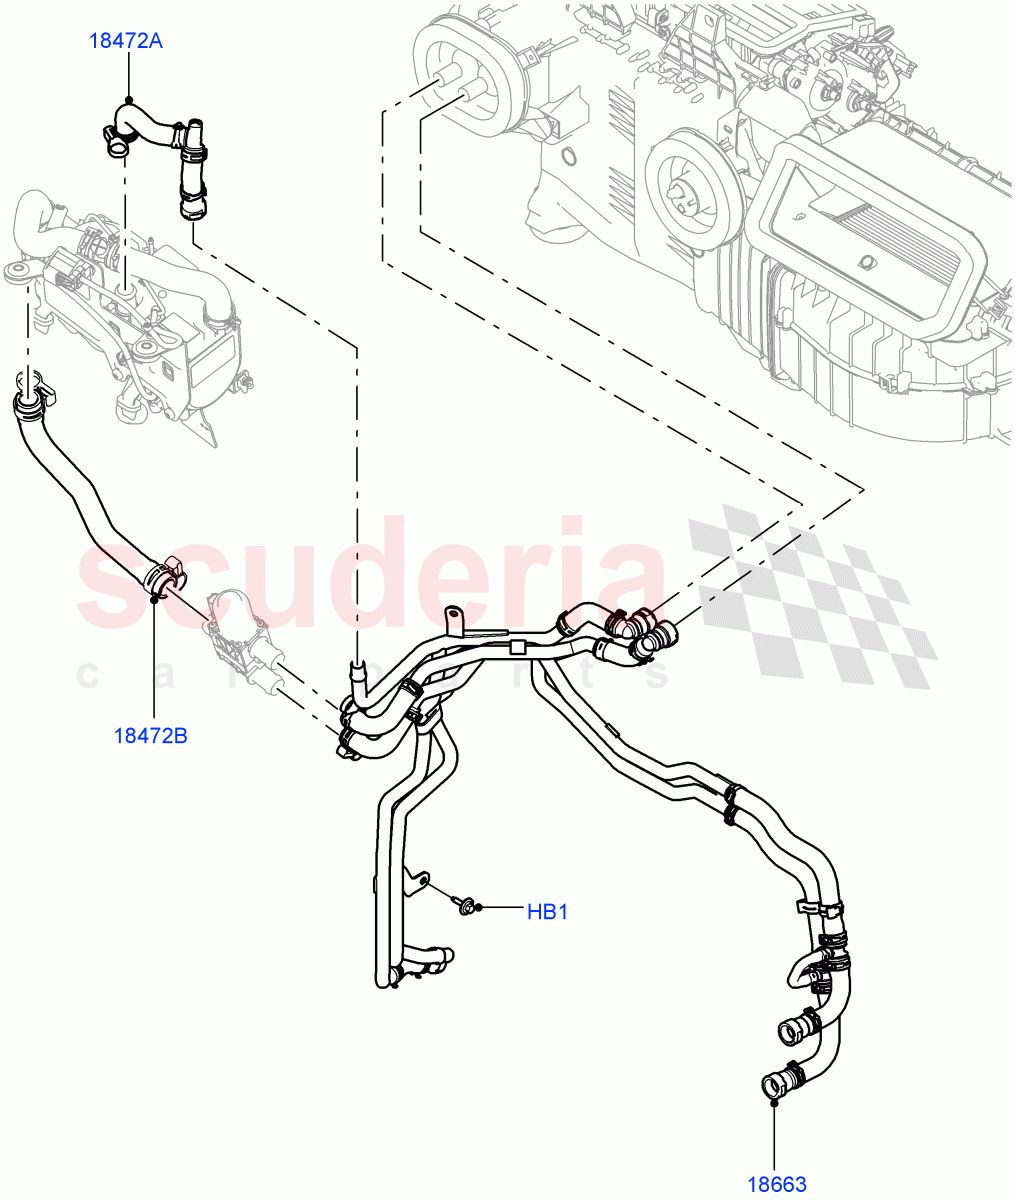 Heater Hoses(Front)(2.0L I4 DSL HIGH DOHC AJ200,With Fuel Fired Heater,With Air Conditioning - Front/Rear,Park Heating With Remote Control)((V)FROMHA000001,(V)TOHA999999) of Land Rover Land Rover Range Rover Sport (2014+) [2.0 Turbo Petrol AJ200P]